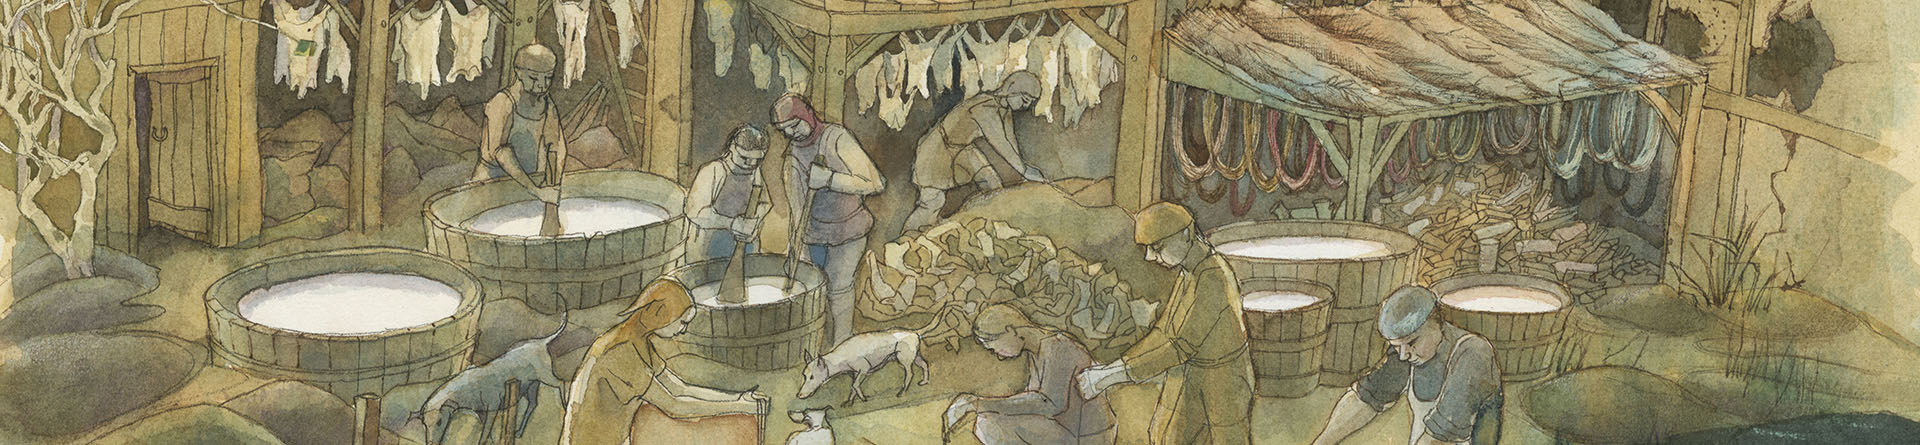 Reconstruction drawing of medieval tannery